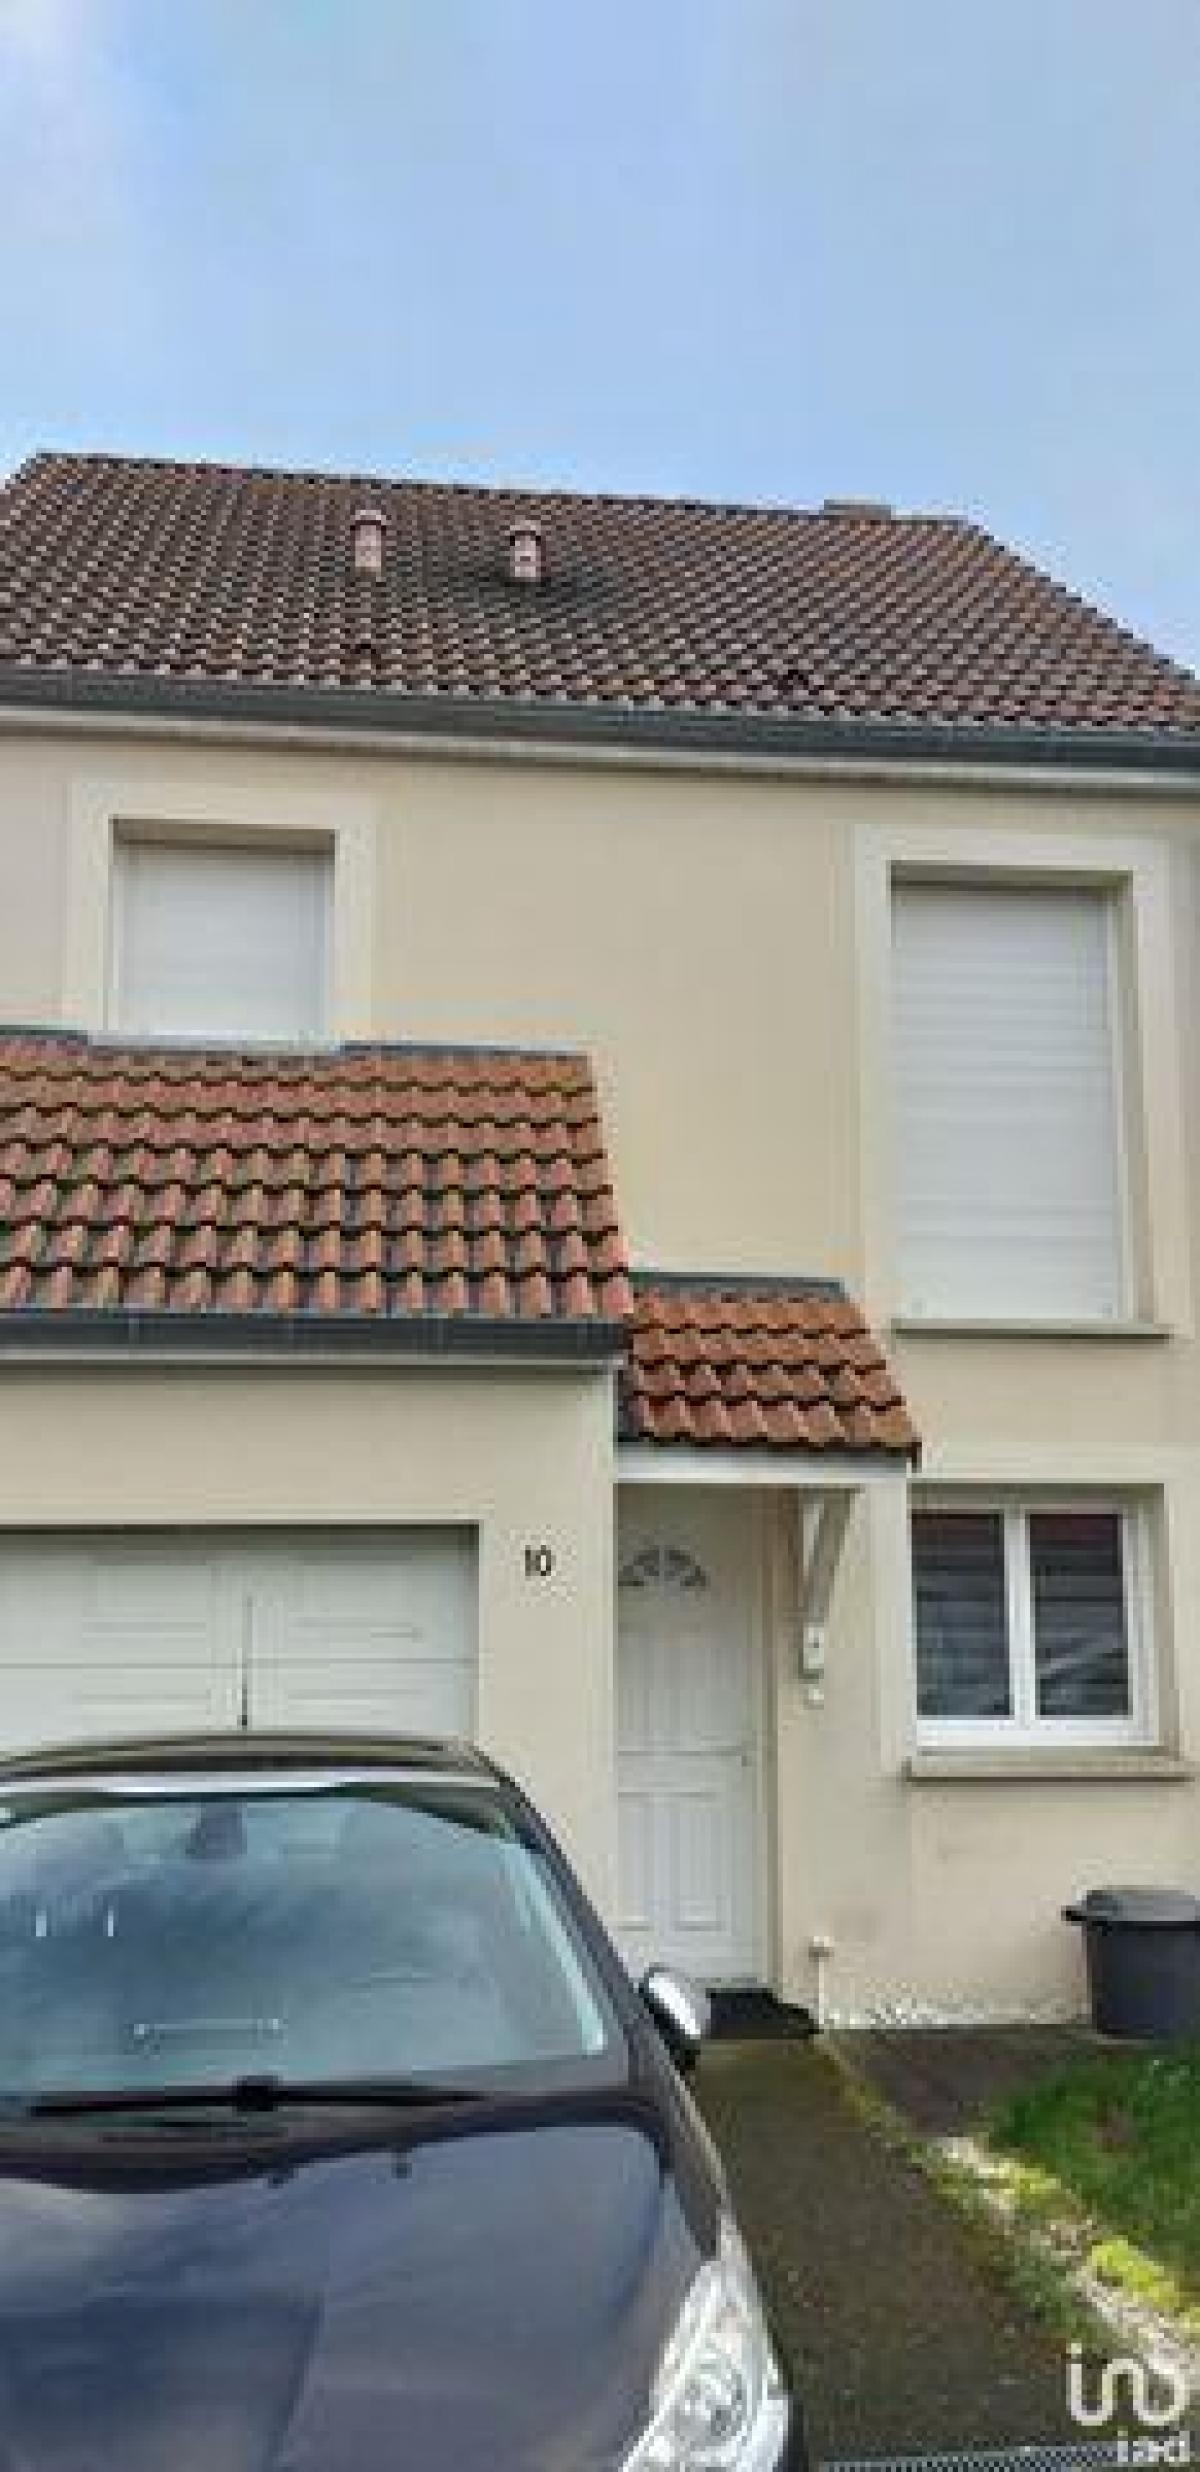 Picture of Home For Sale in Florange, Lorraine, France